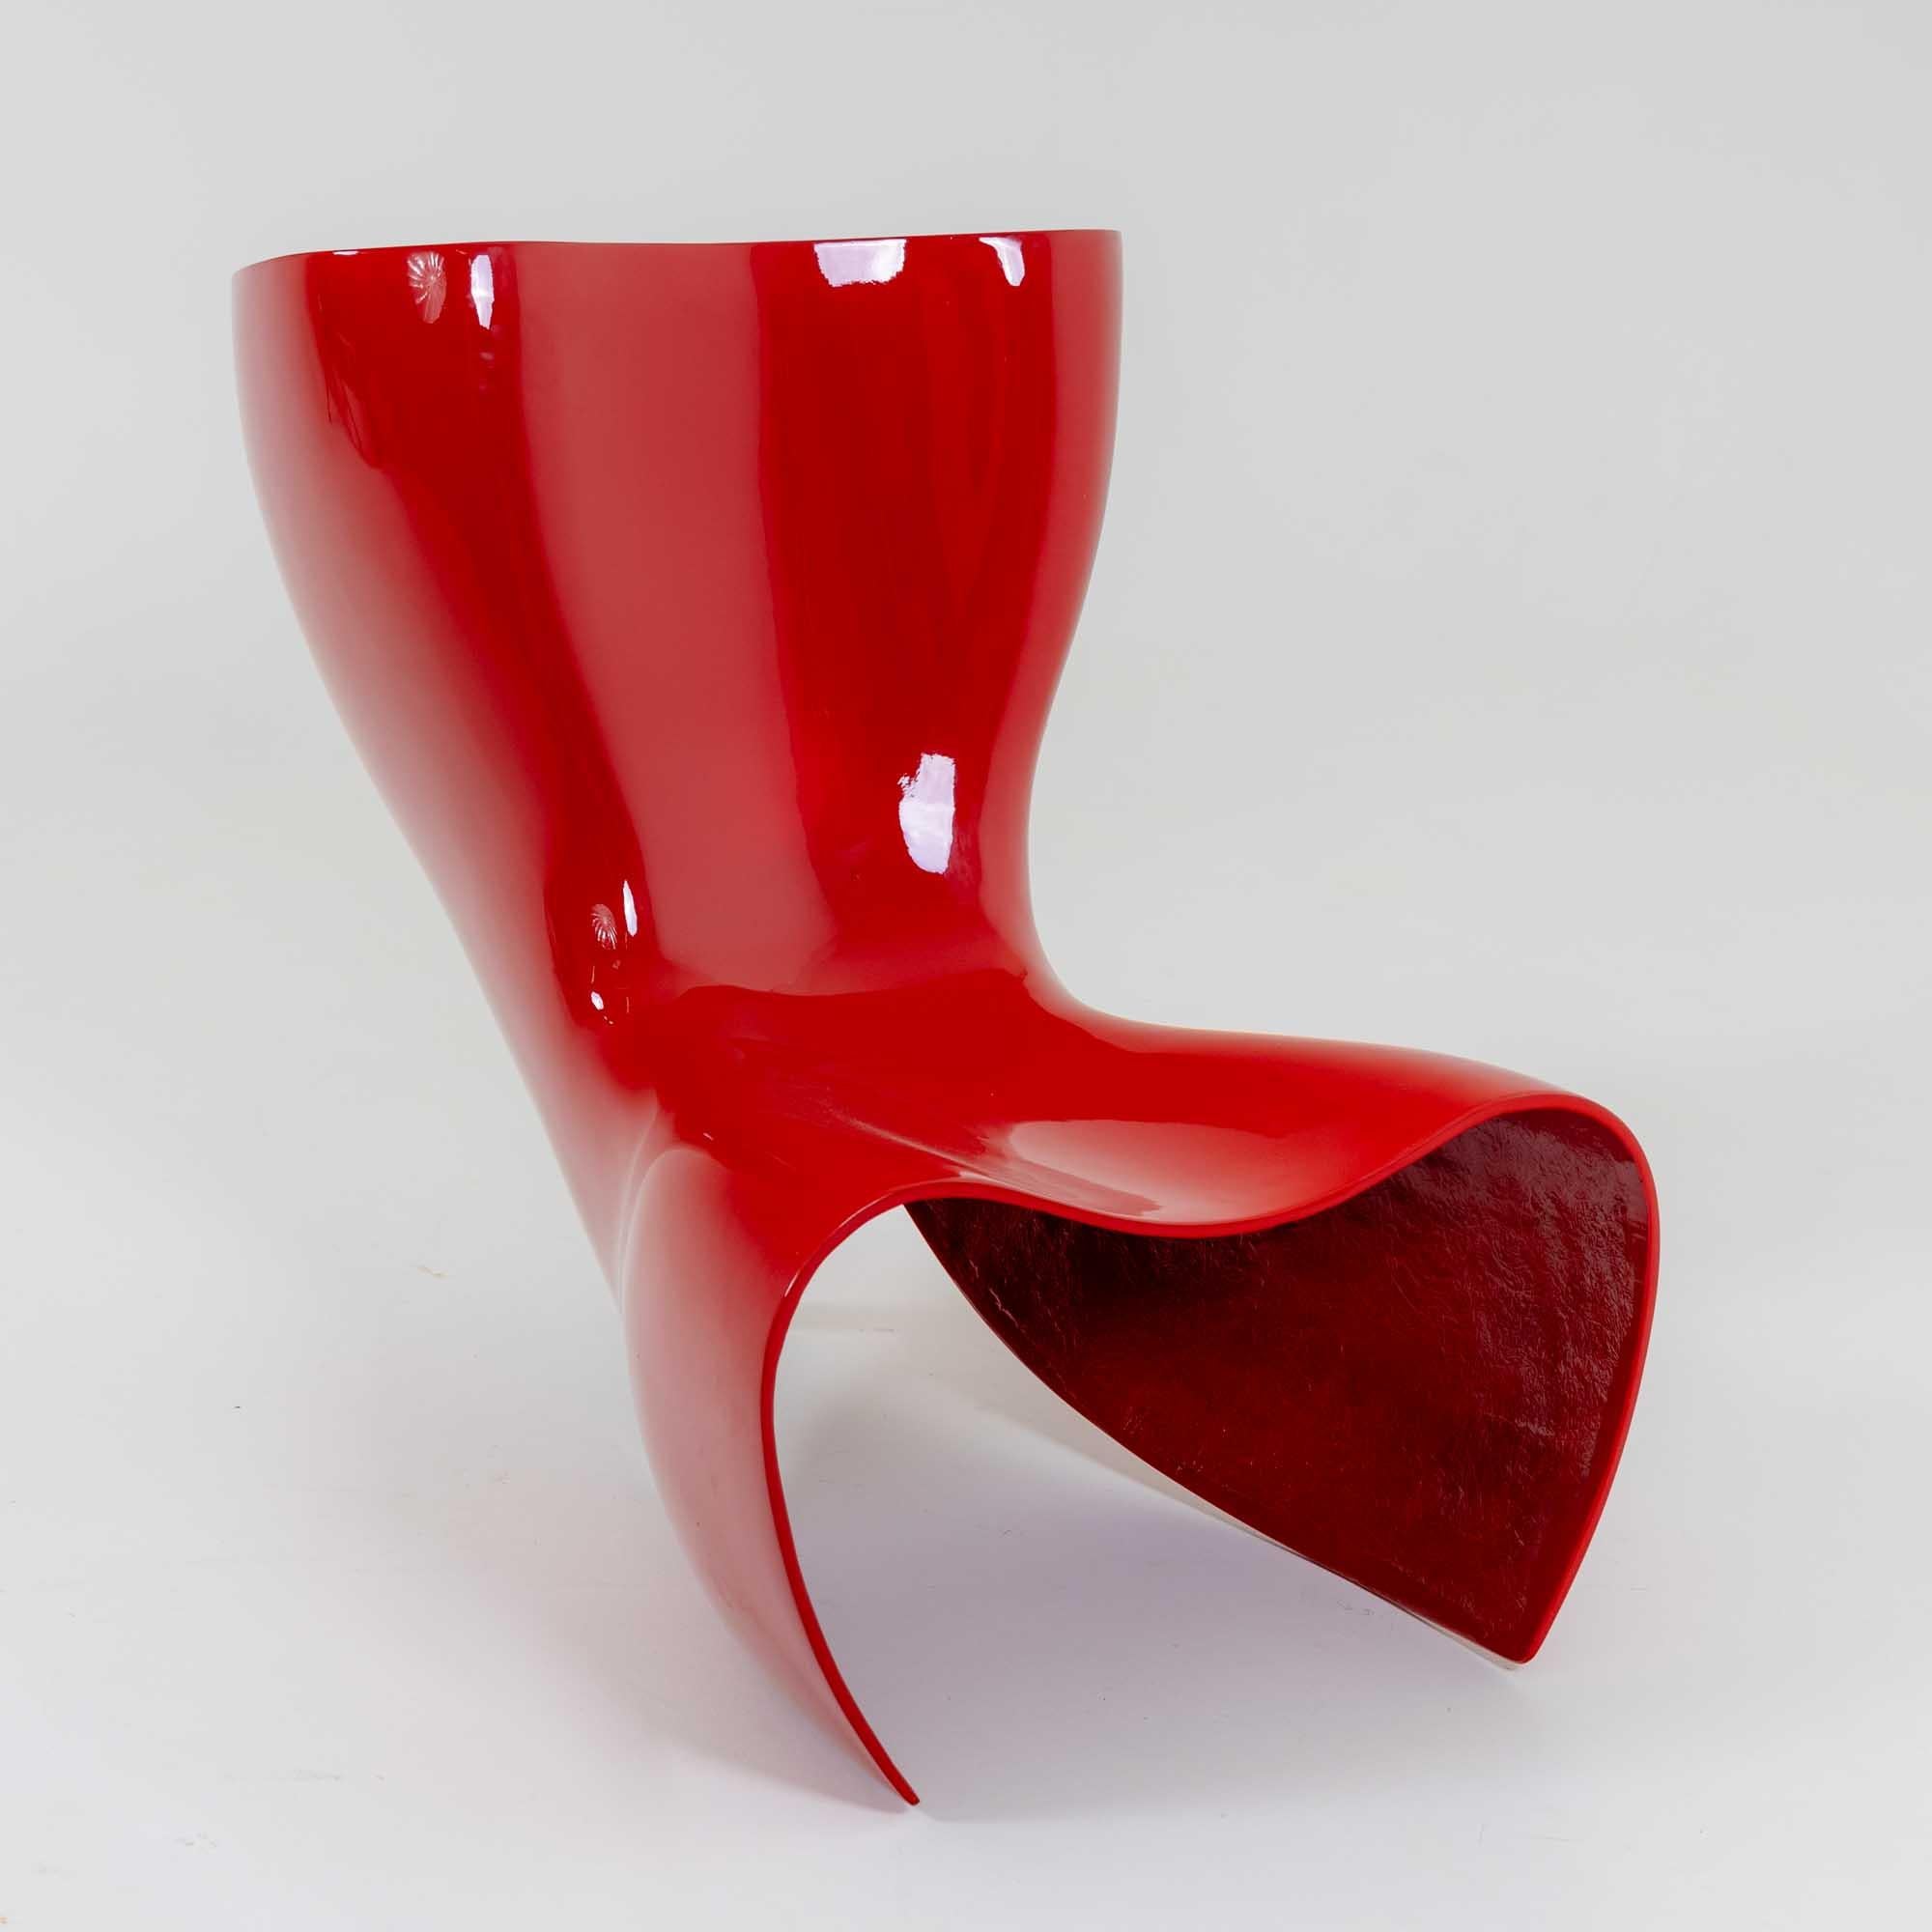 Italian Felt Chair by Marc Newson for Cappellini, Italy designed in 1993 For Sale